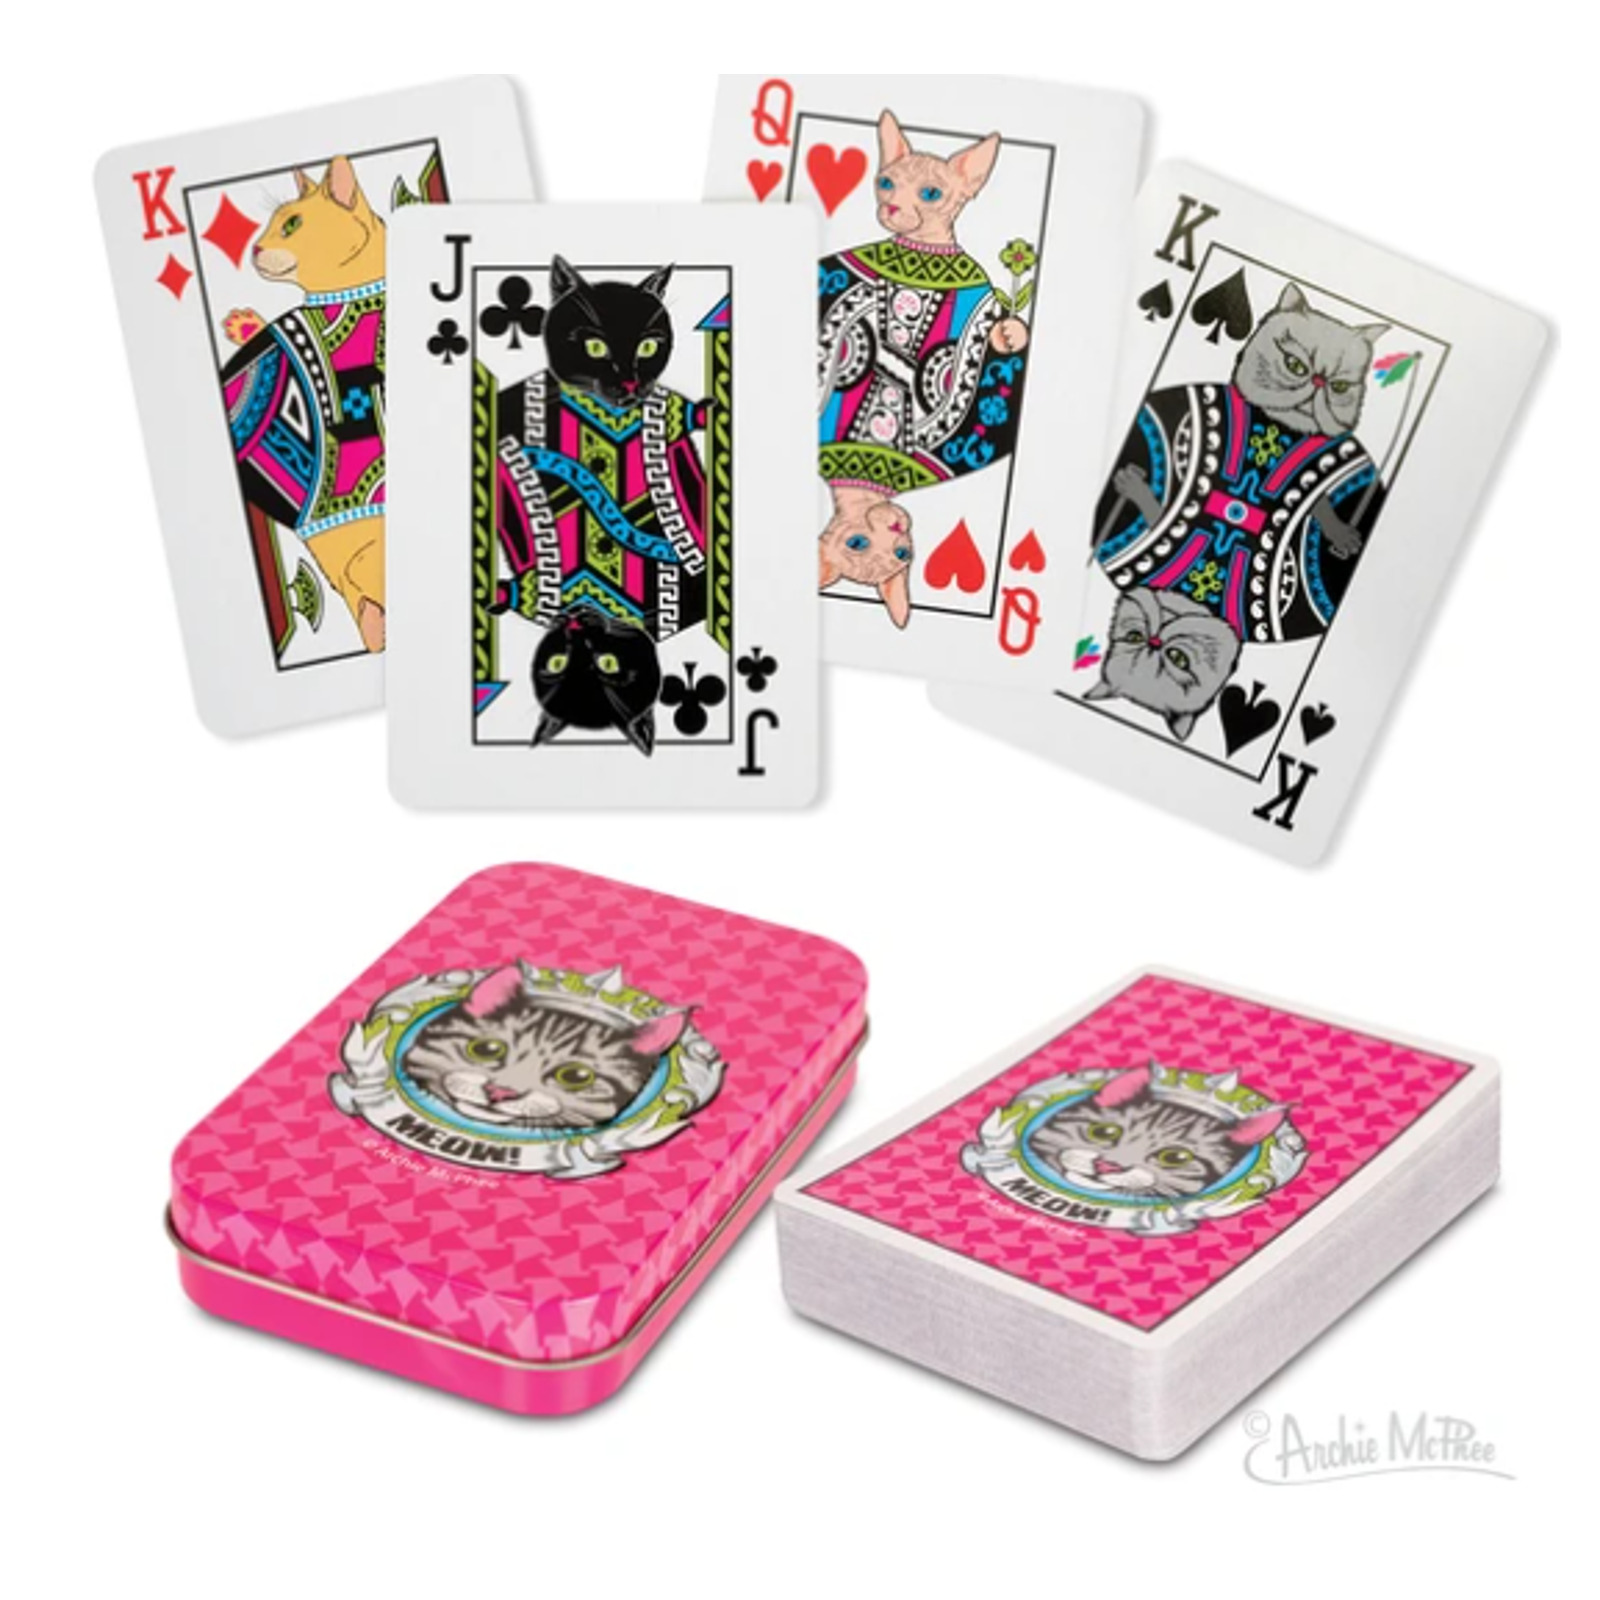 New Archie McPhee Cat Kitten Deck of Playing Cards Queen Hearts Kitty Game